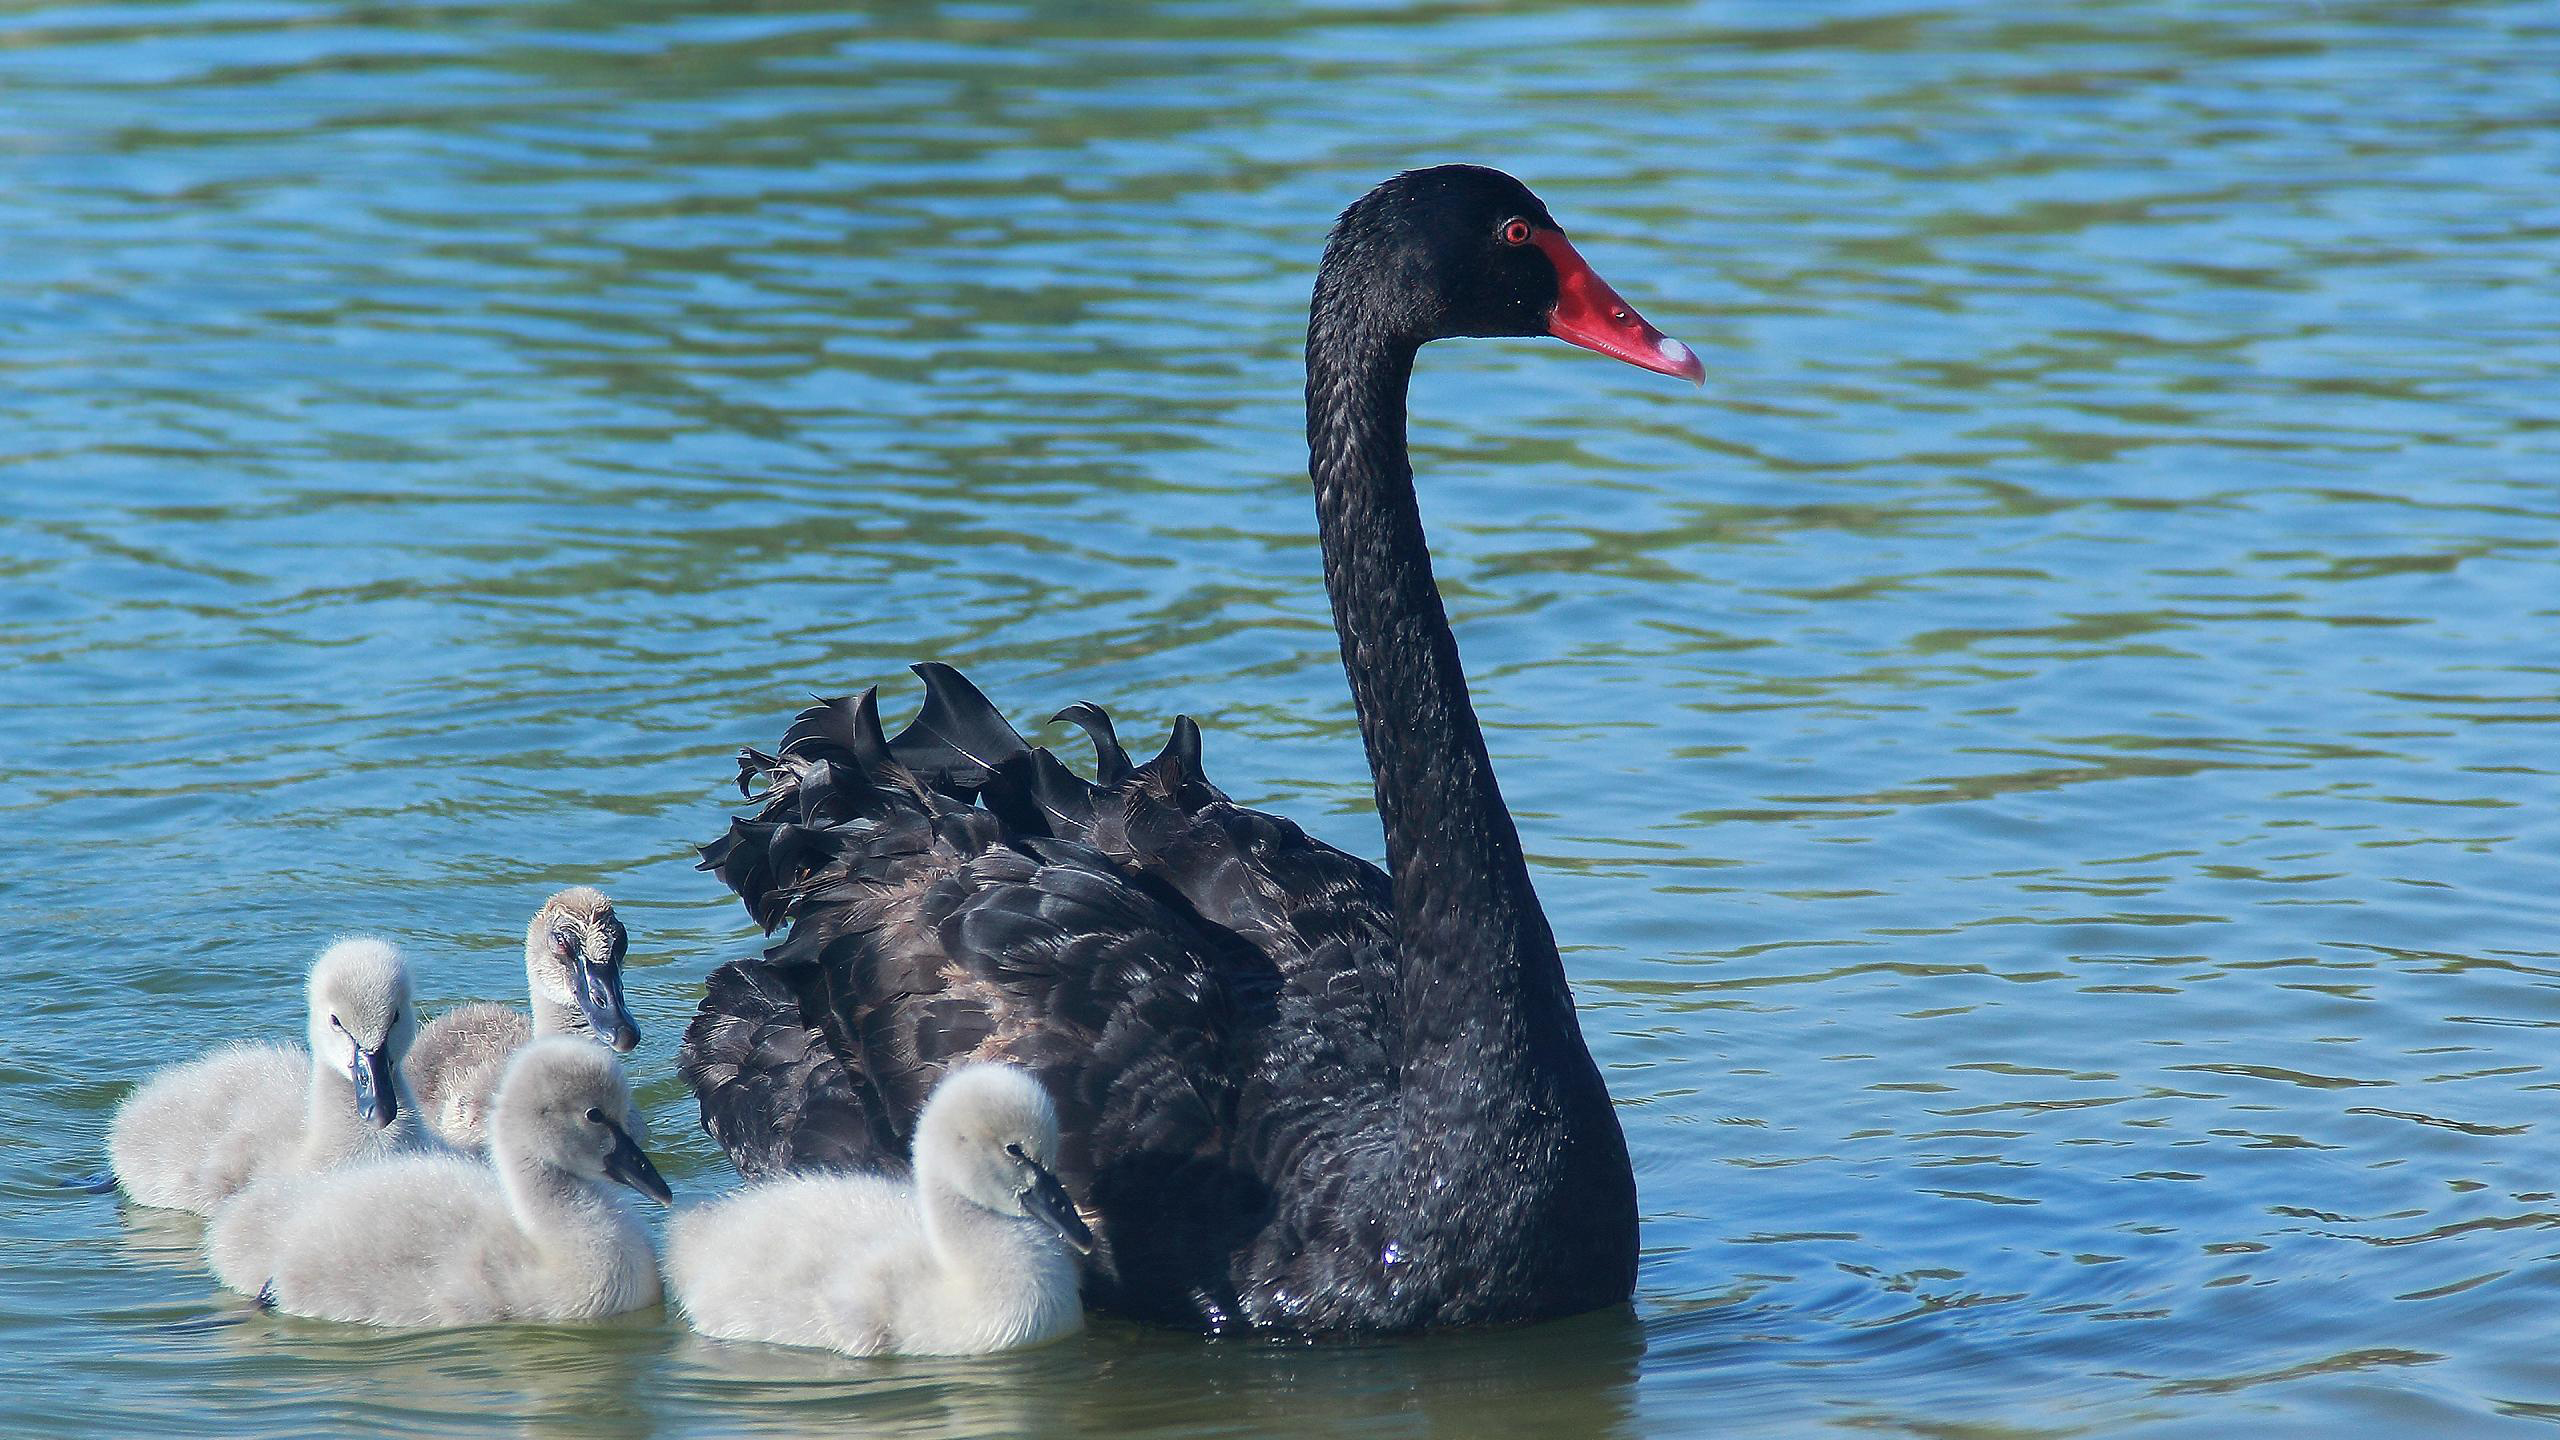 Bird Black Swan And White Chick Swan On Body Of Water During Daytime 2K Animals